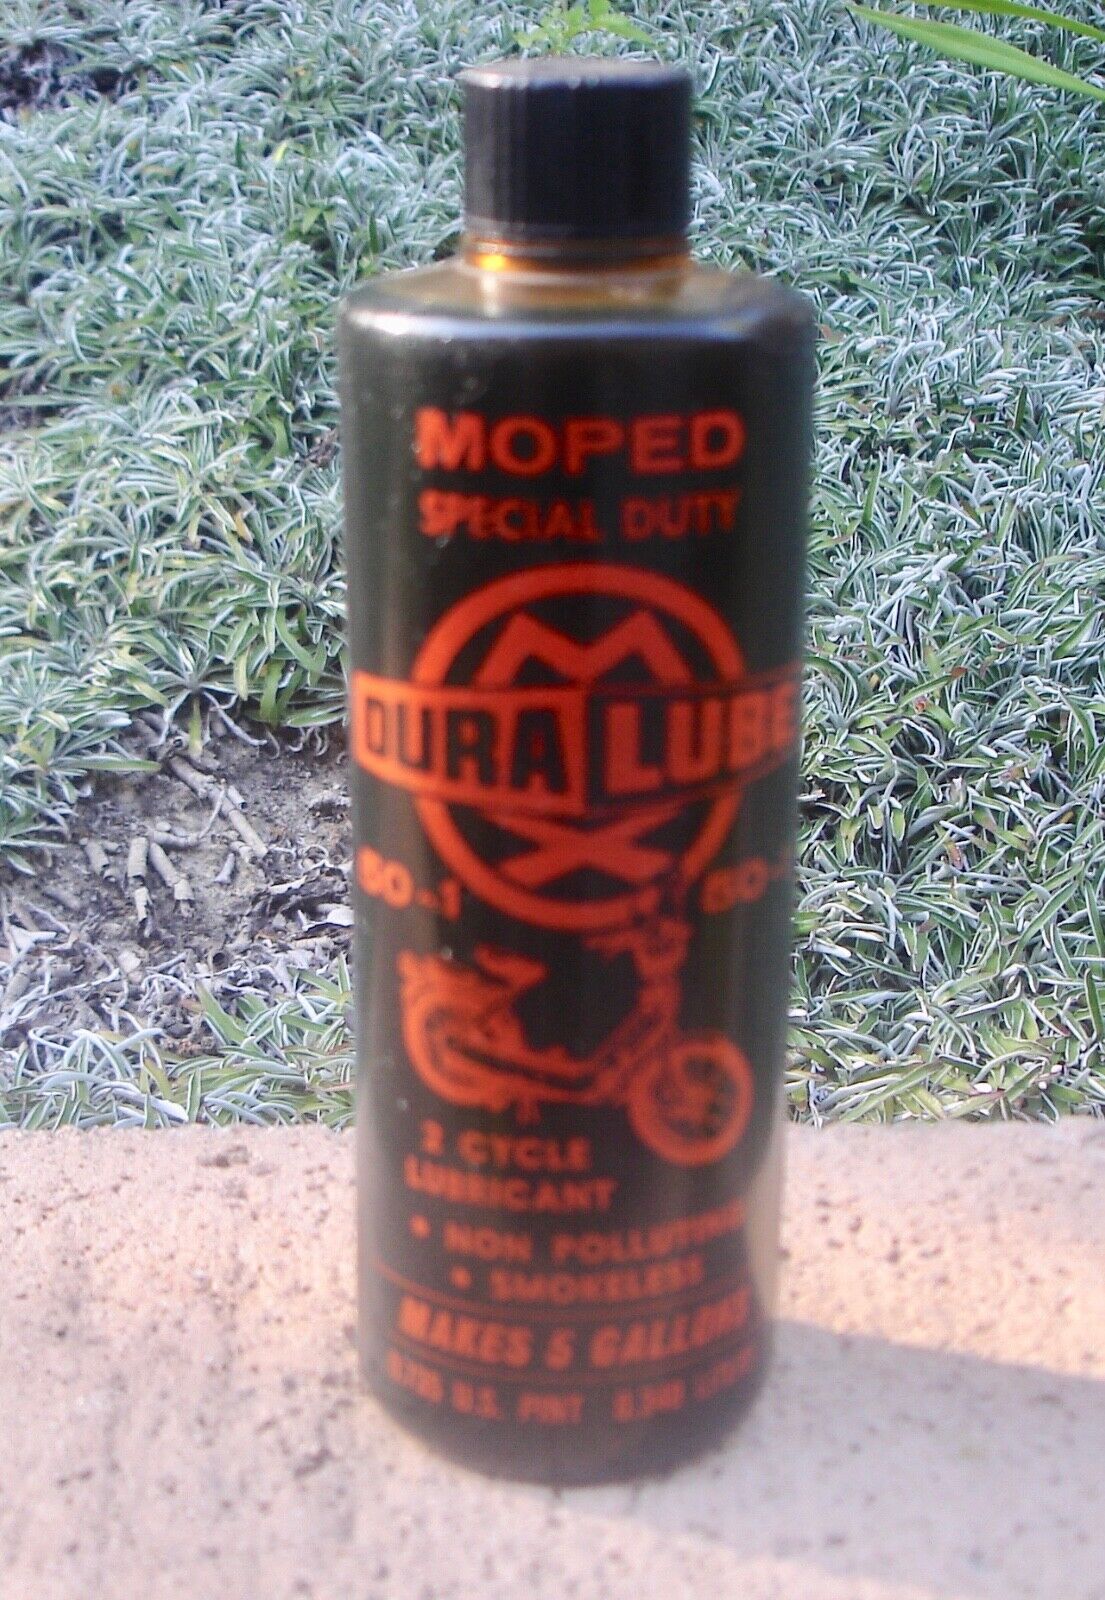 Vintage Moped Dura Lube Special Duty 2 Cycle Lubricant 50-1 Bottle 1973, Nice